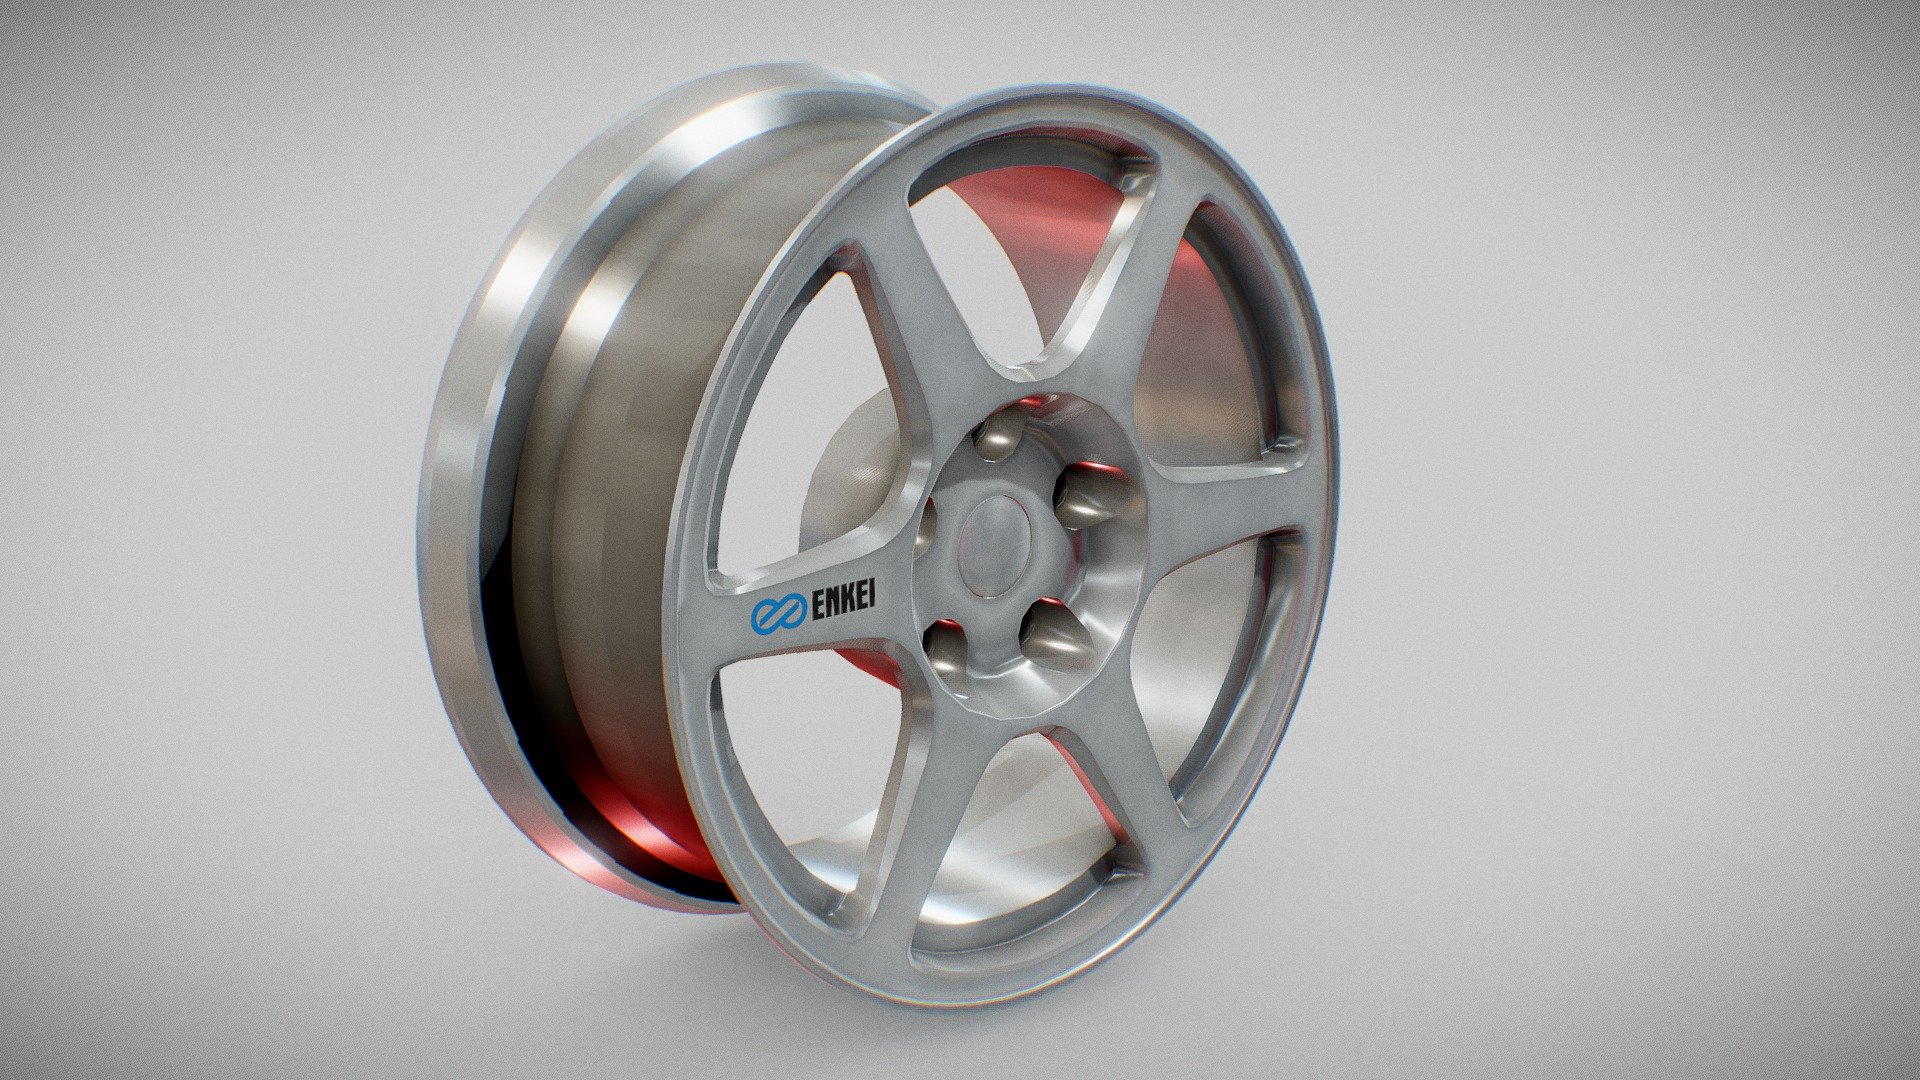 It is mid-poly 3D model of Mitsubishi OEM Evo 8 wheel.
You can write me to get more formats 3d model